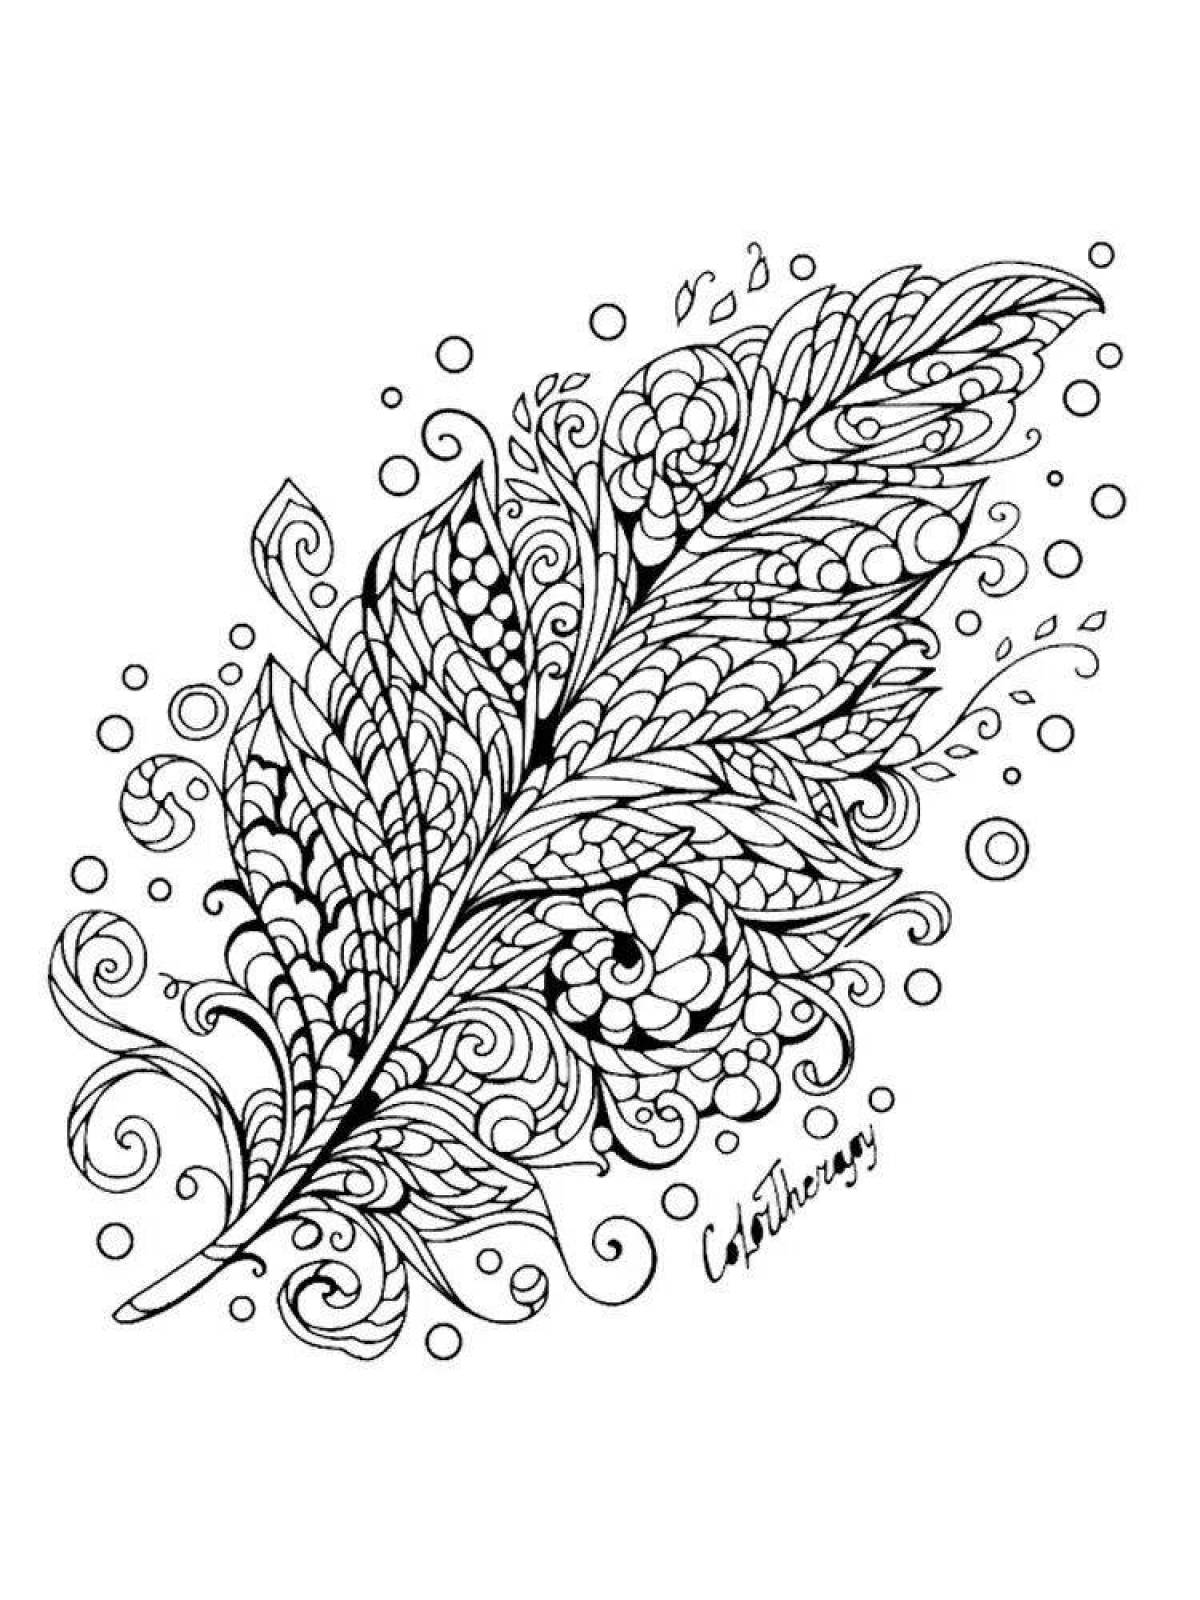 Sublime coloring page graphics